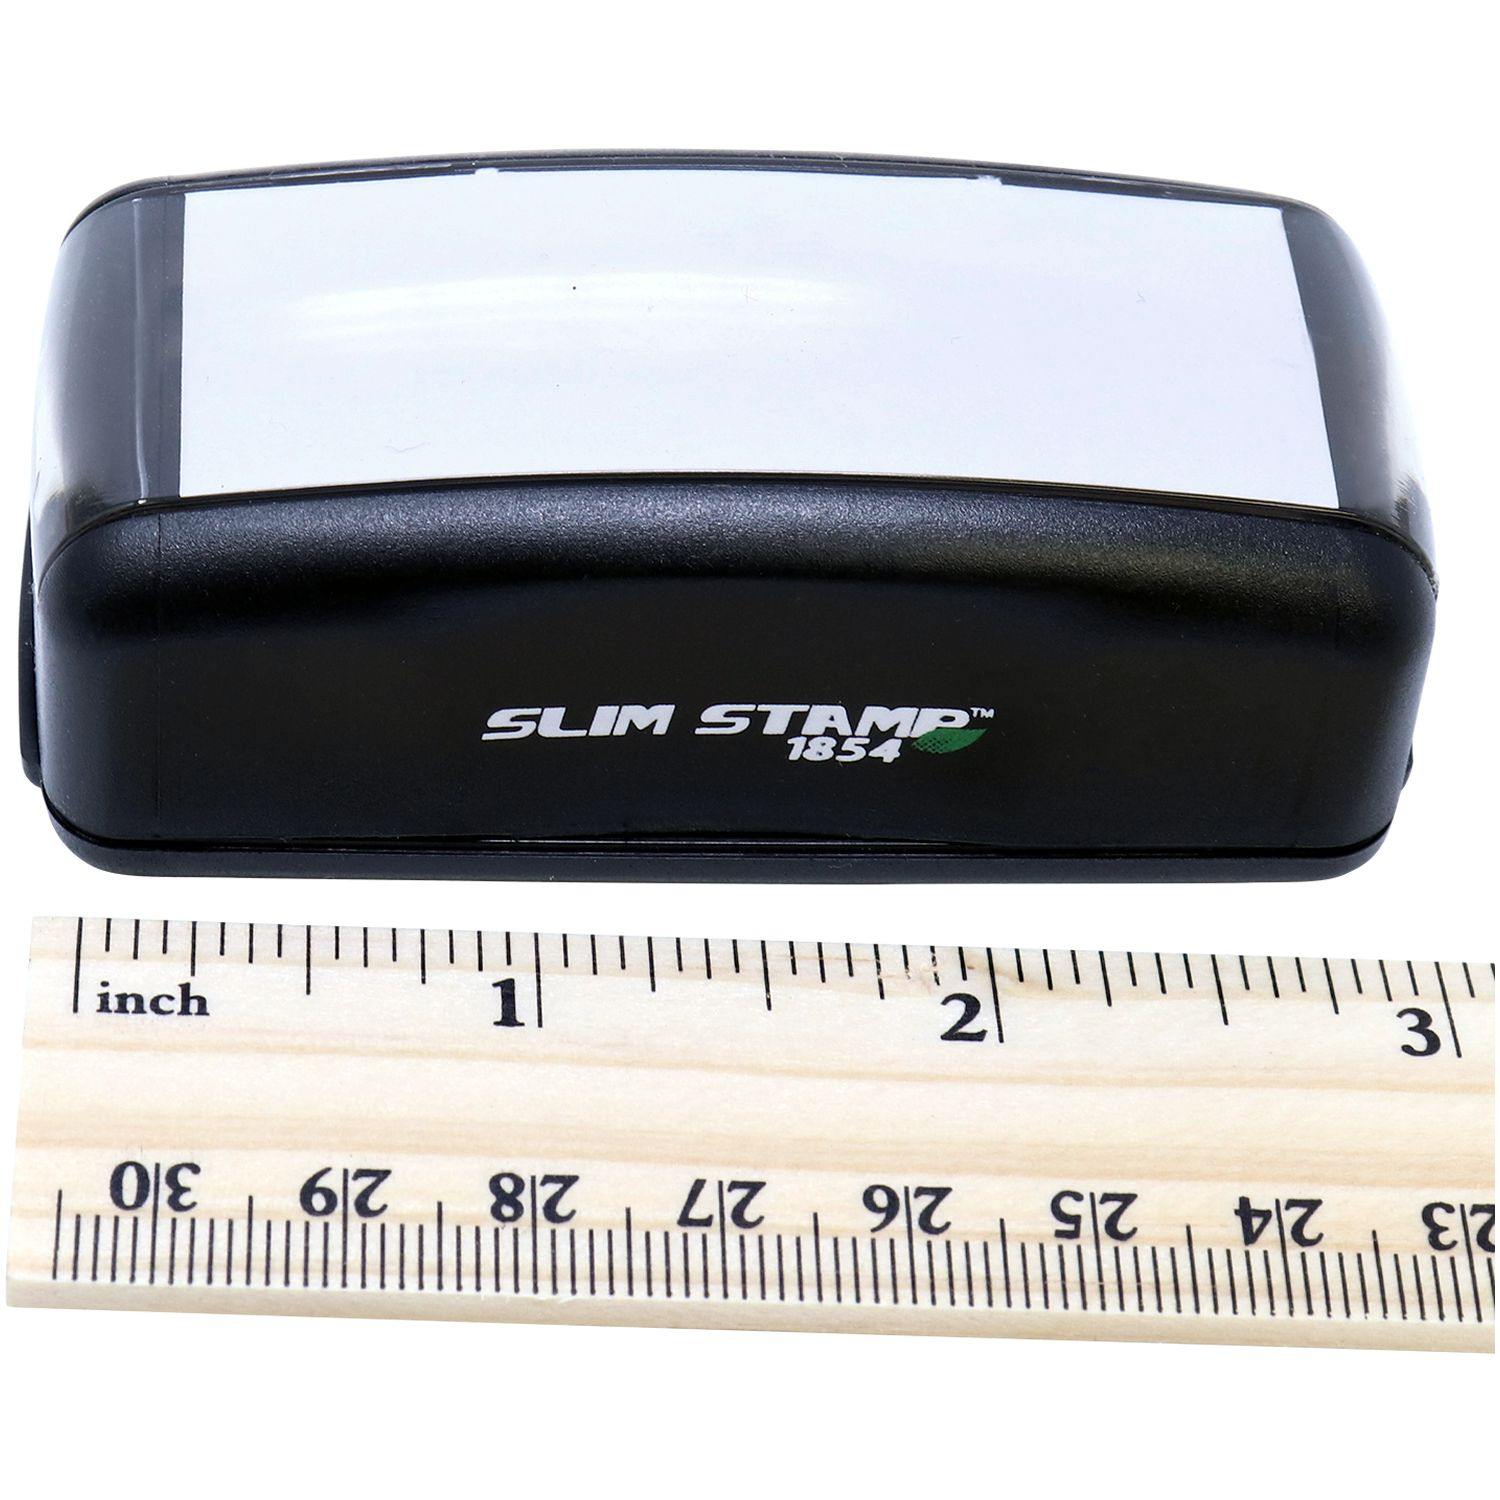 Measurement Large Pre-Inked Covid-19 Patient Stamp with Ruler